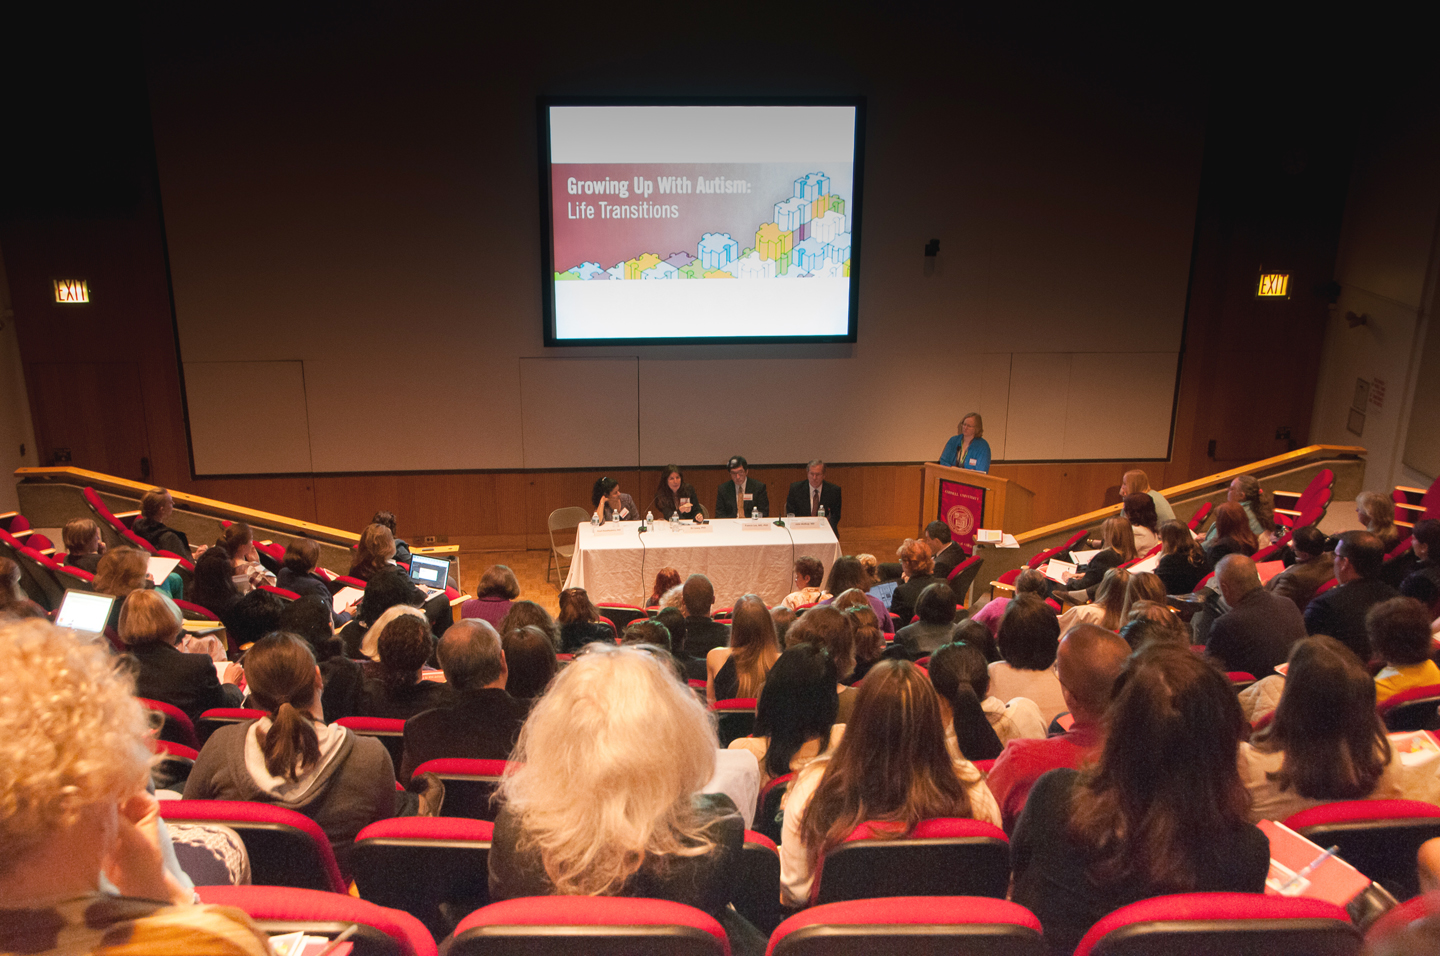 A panel focusing on basic science research into autism spectrum disorders and brain development answer questions during the second annual Autism Symposium. From left to right: Dr. Anjali Rajadhyaksha, Dr. B.J. Casey, Dr. Francis Lee, Dr. John Walkup and Dr. Catherine Lord Photo credit: Amelia Panico